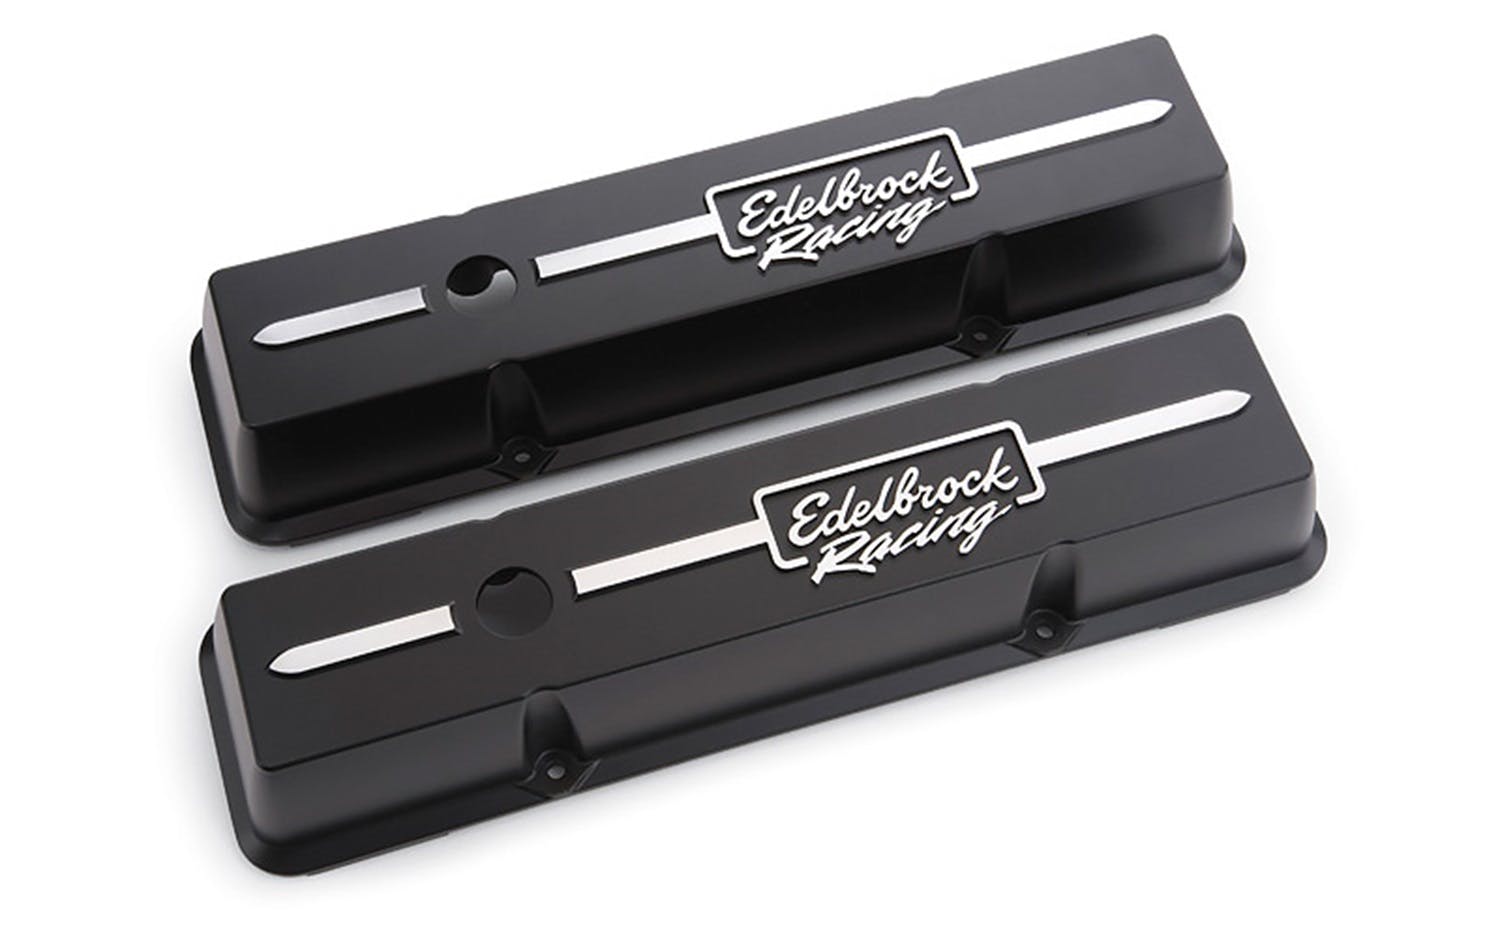 Edelbrock 41633 Racing Series Valve Covers forChevy 262-400 V8 1959-86.